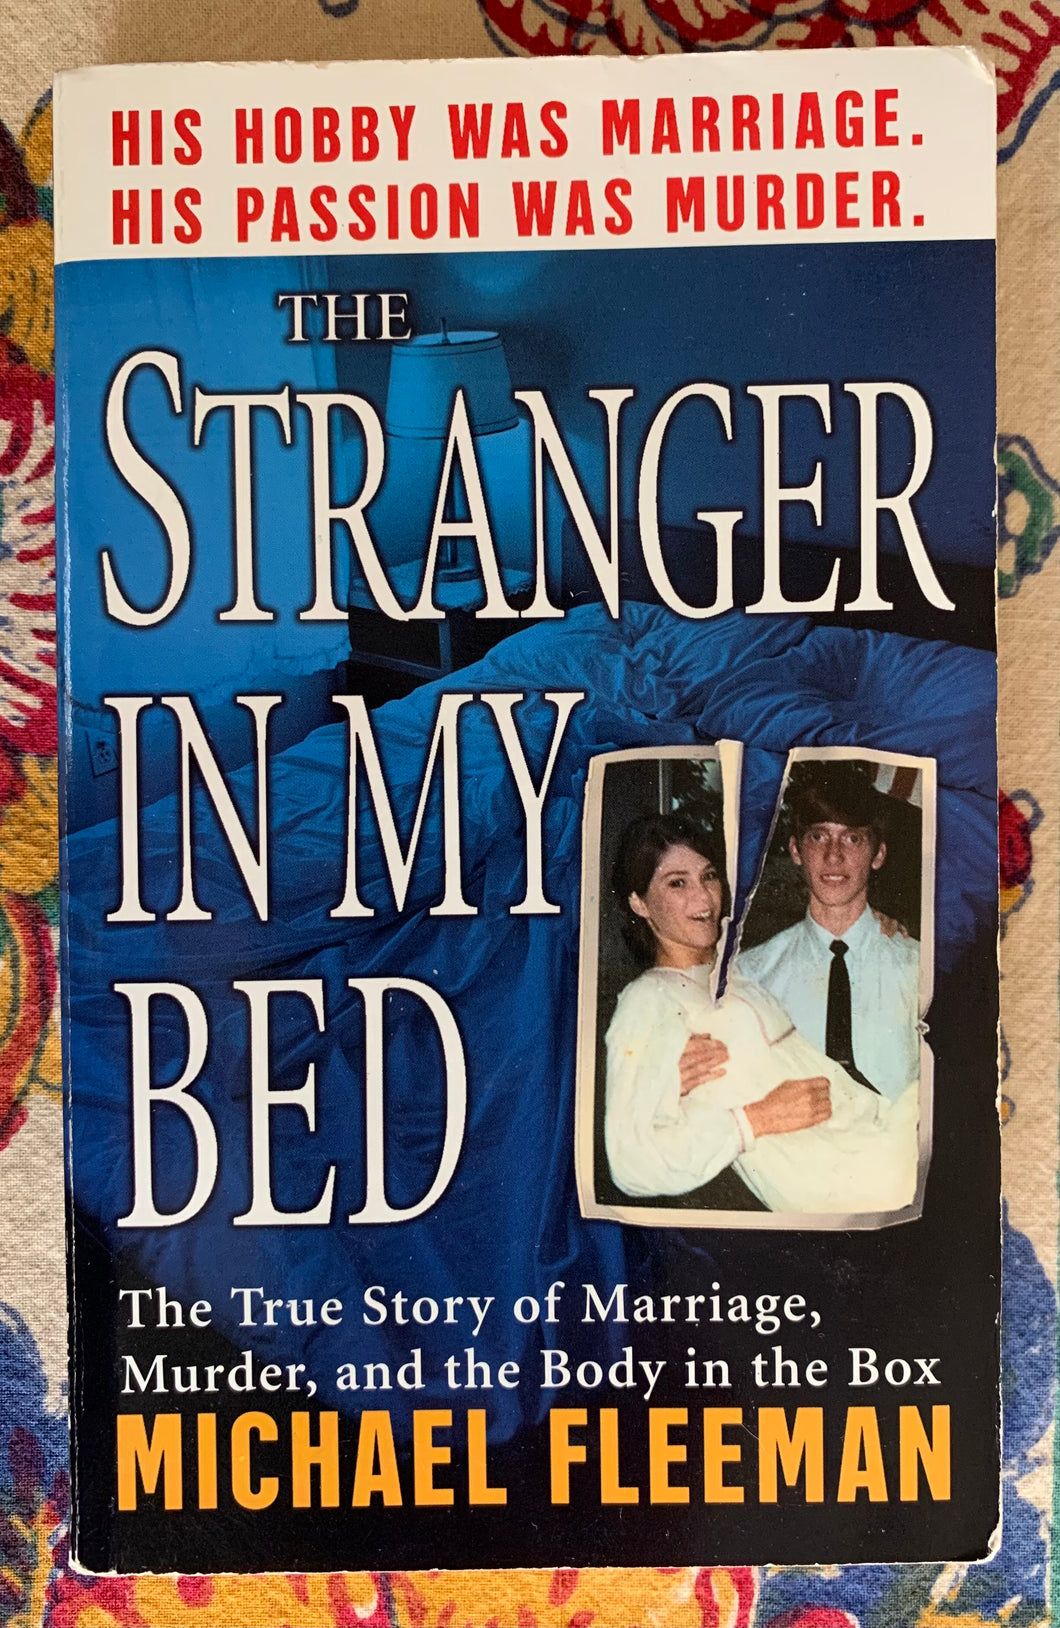 The Stranger In My Bed: The True Story of Marriage, Murder, and the Body in the Box